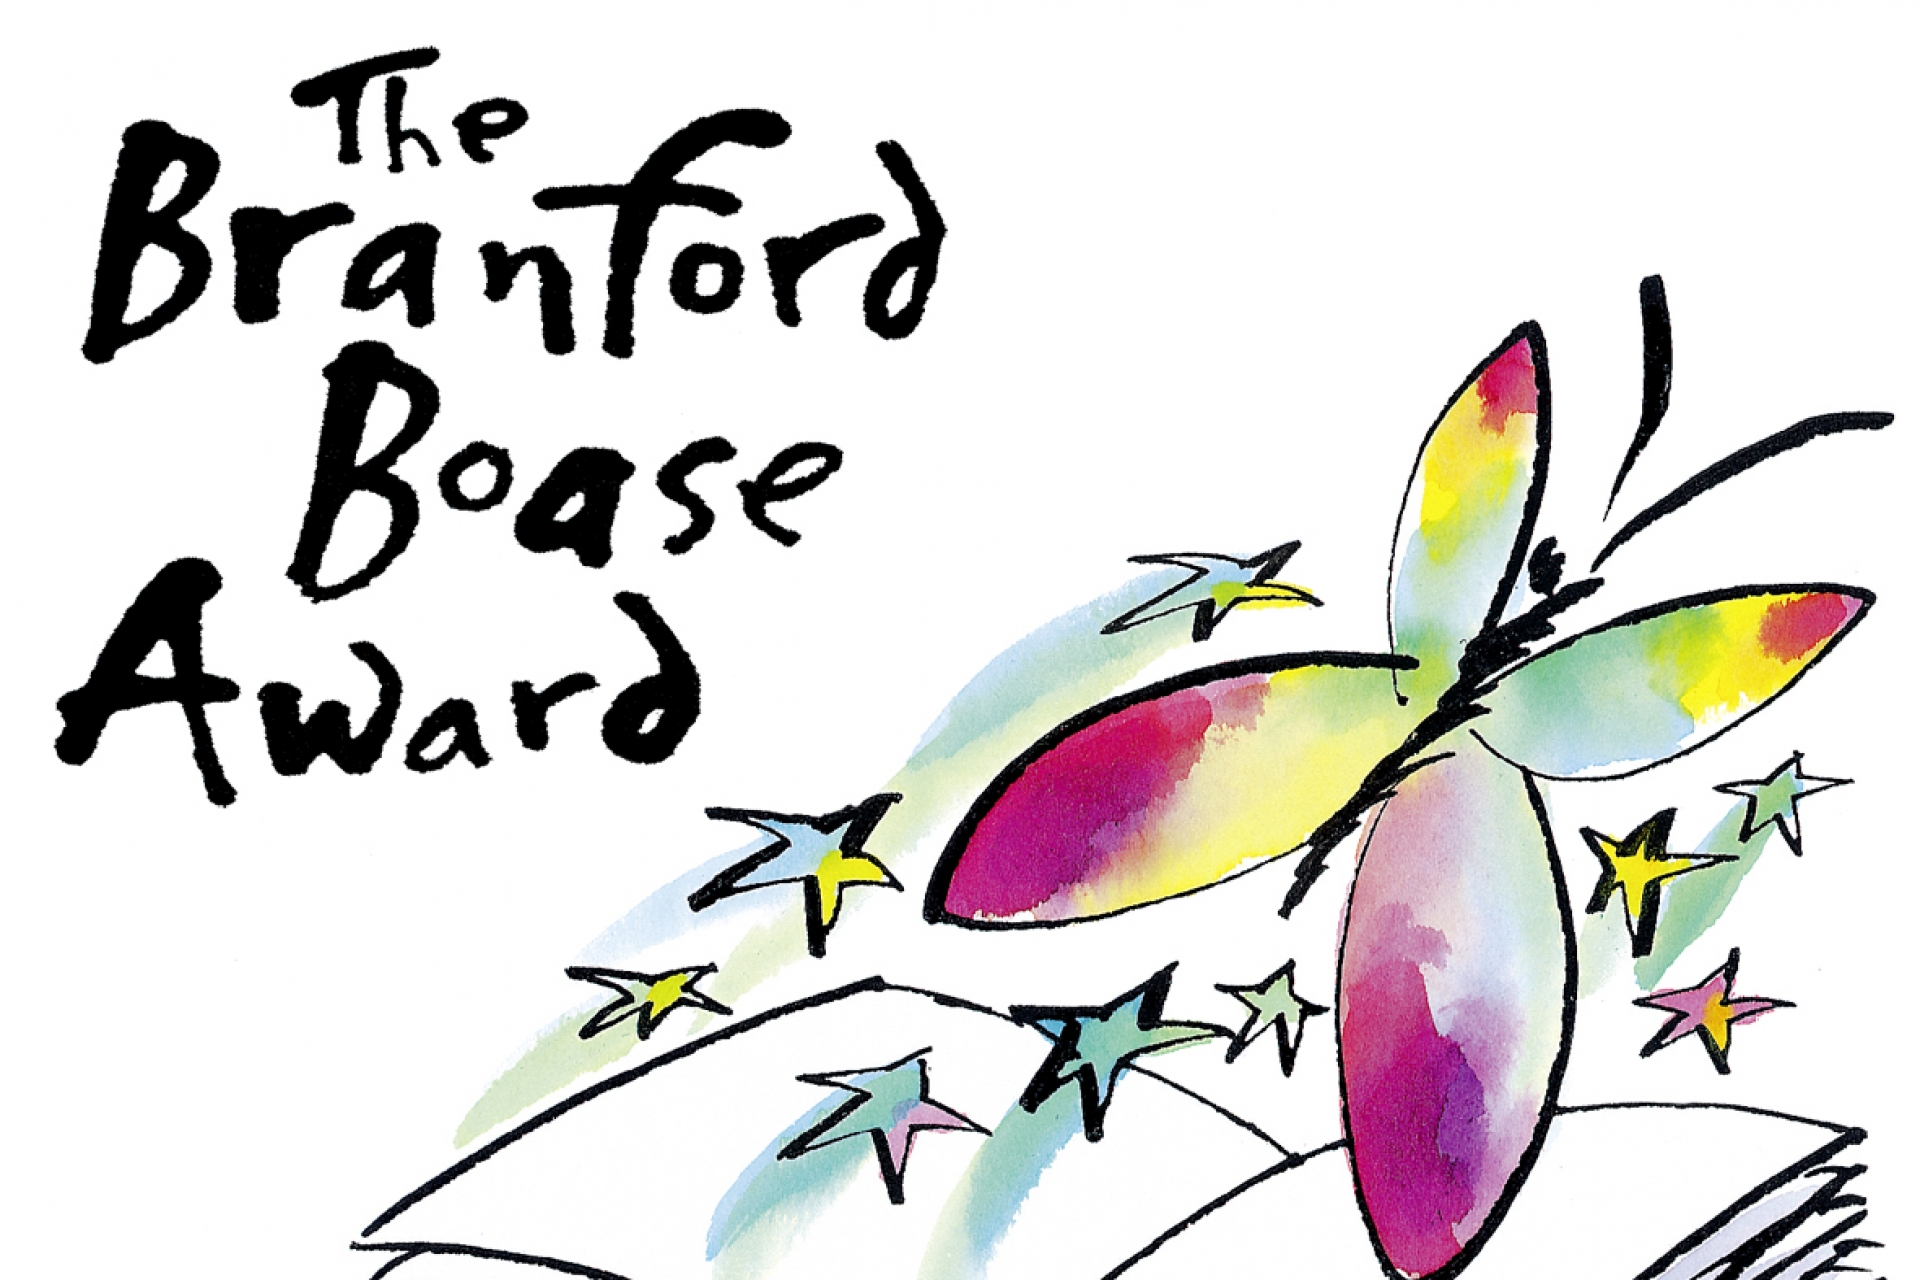 The Branford Boase 2022 Submissions are now open...and we can't wait to see what 2022 brings!